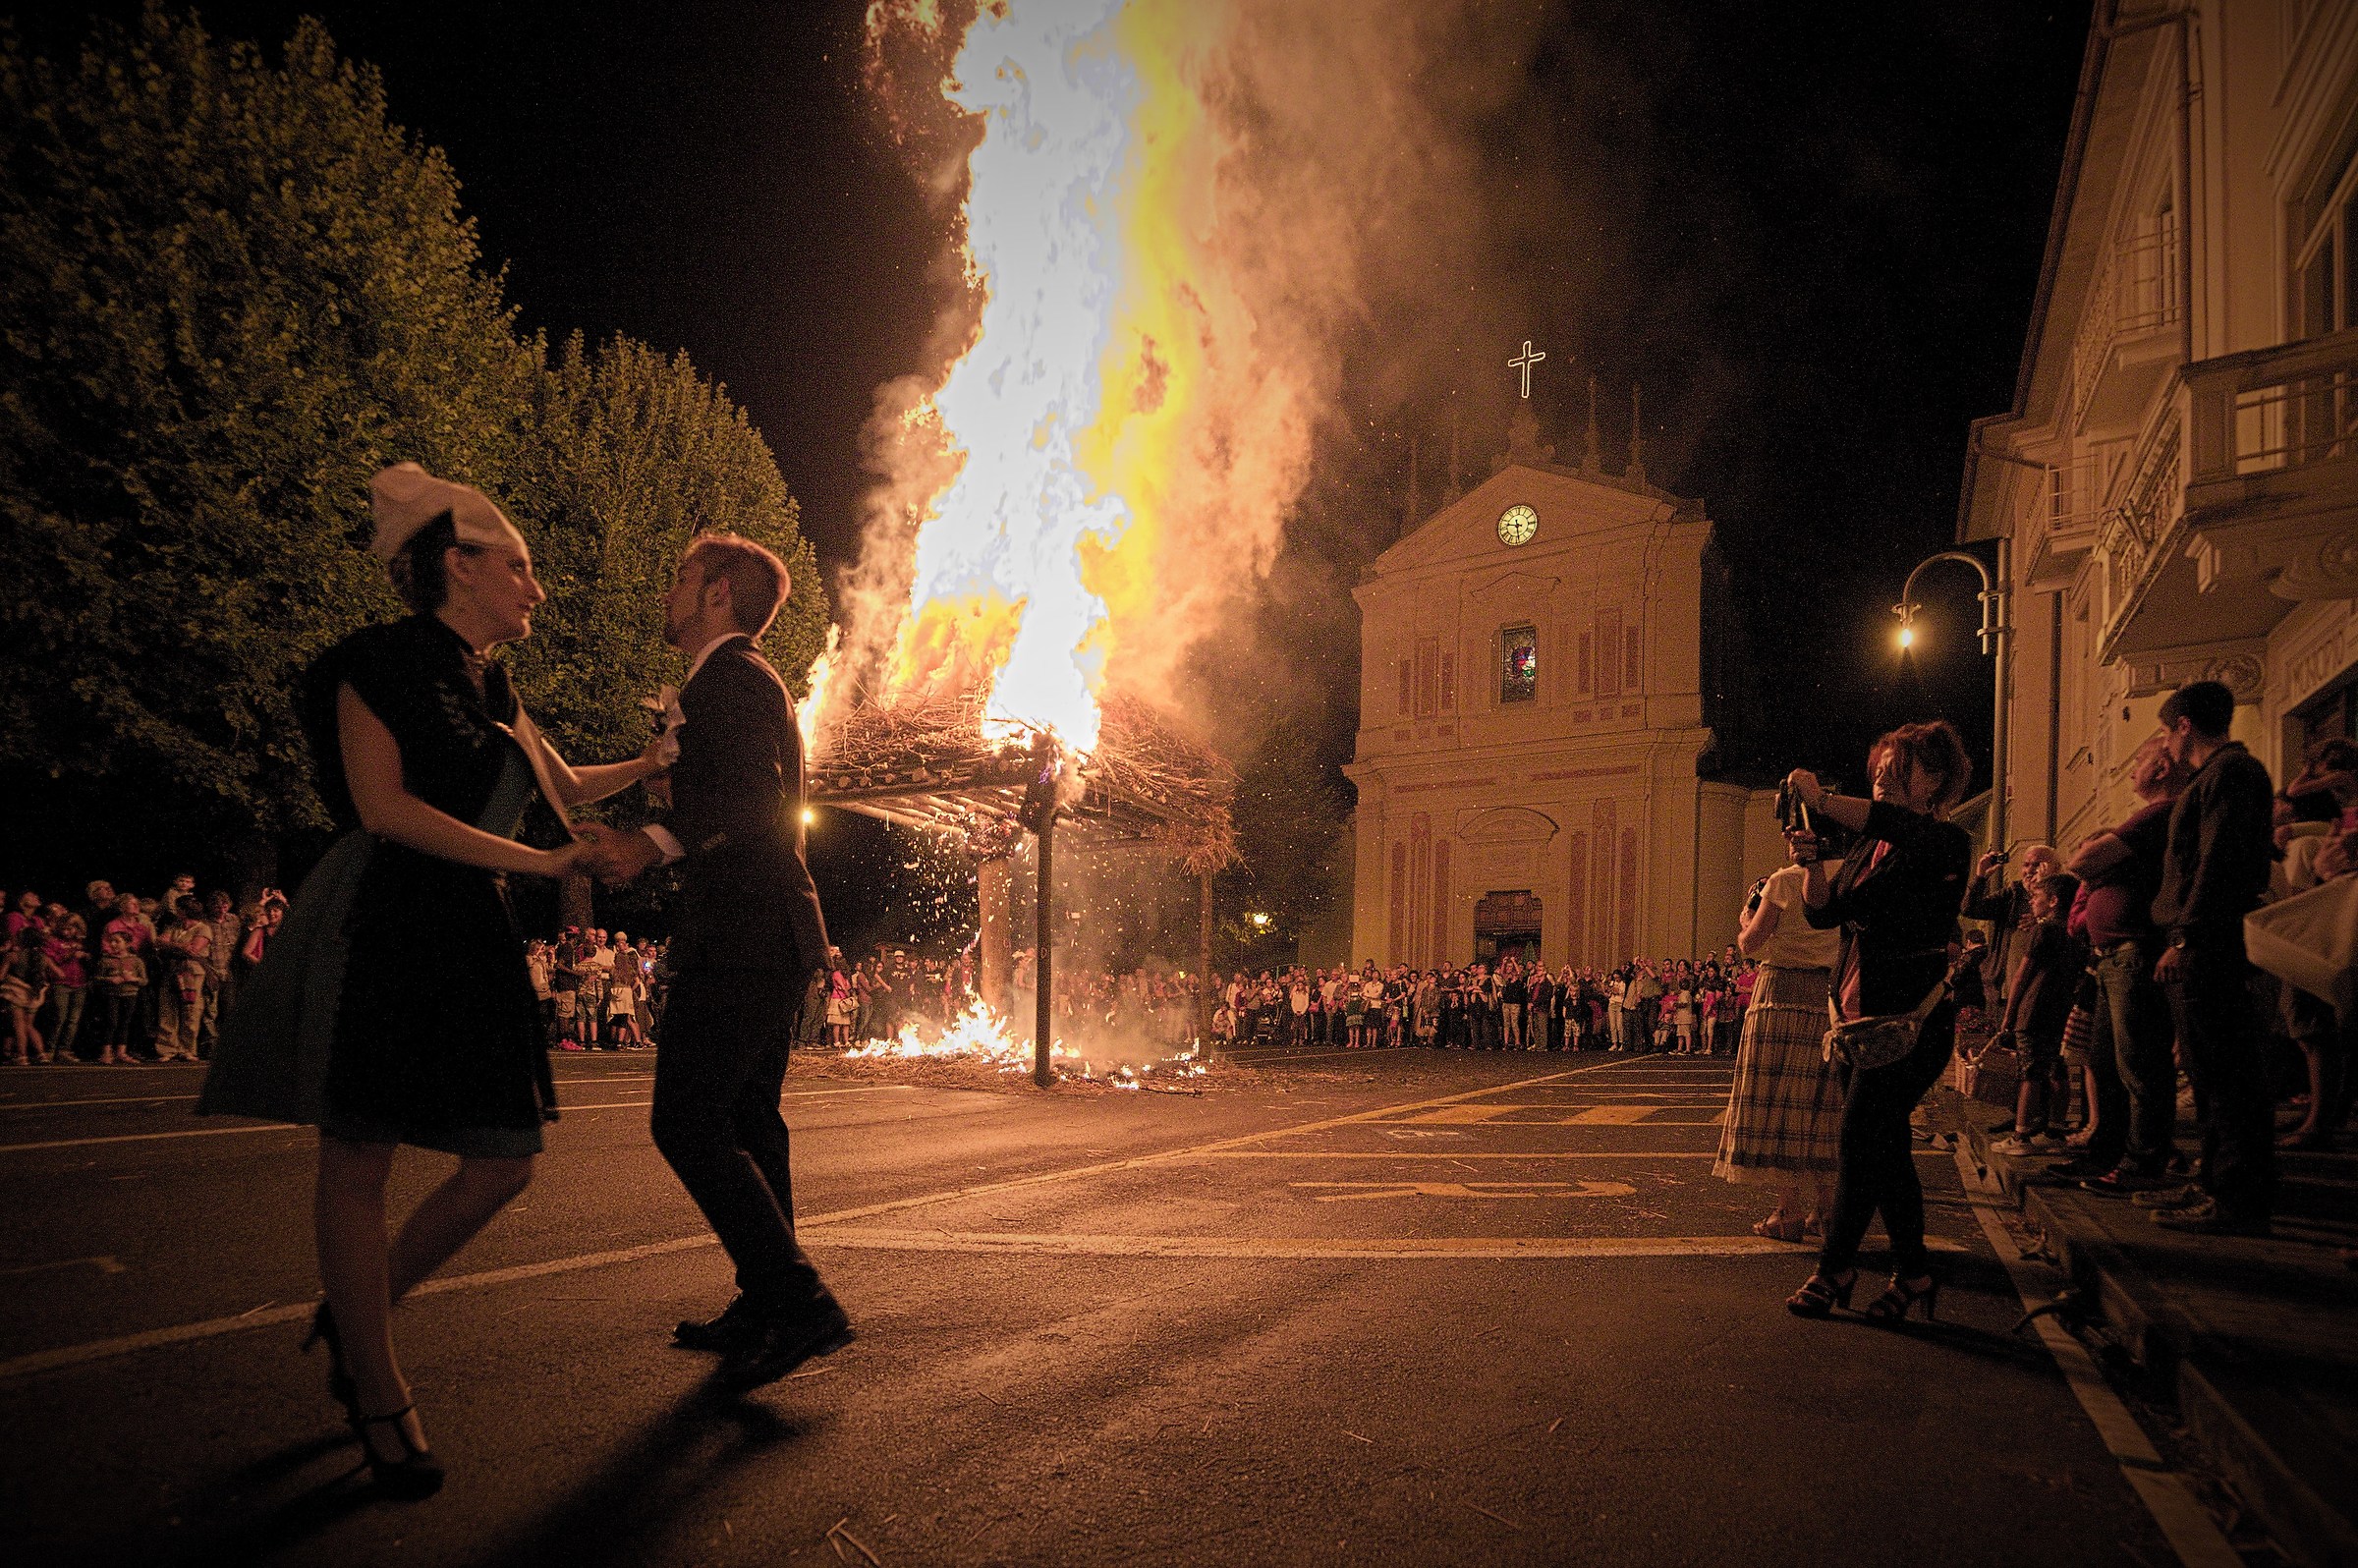 The dance of the Priors and the bonfire...